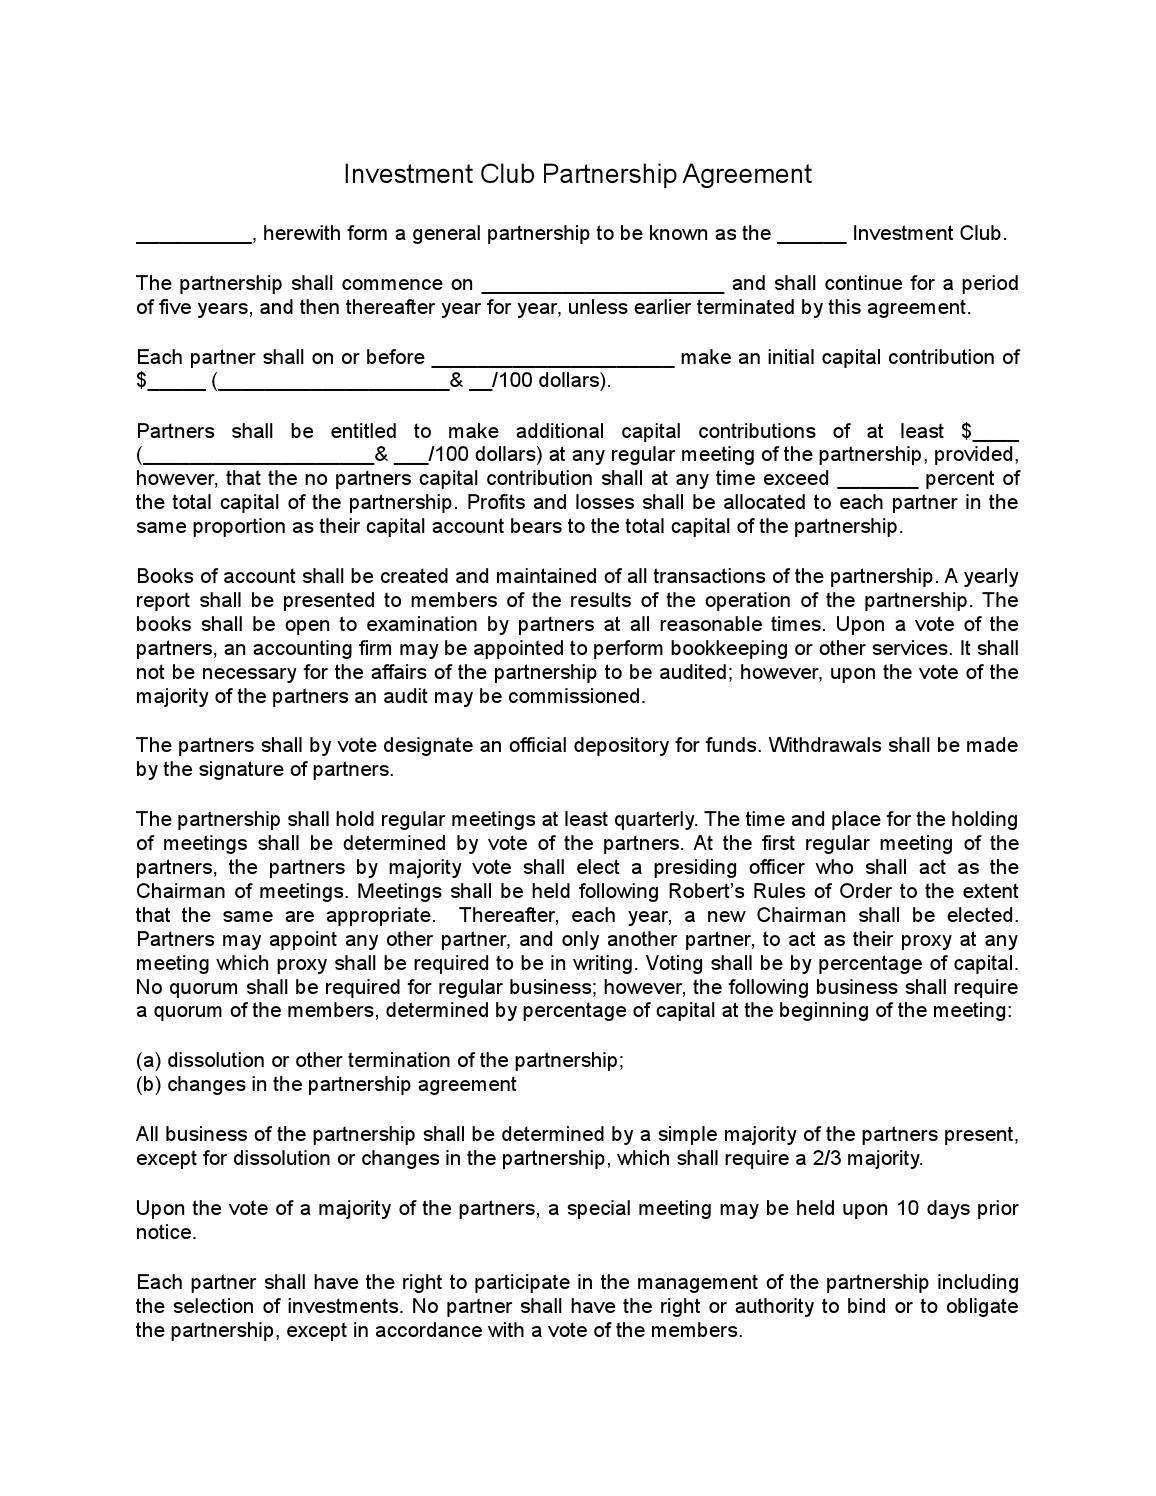 Investment Club Partnership Agreement By Sample Legal Forms Issuu